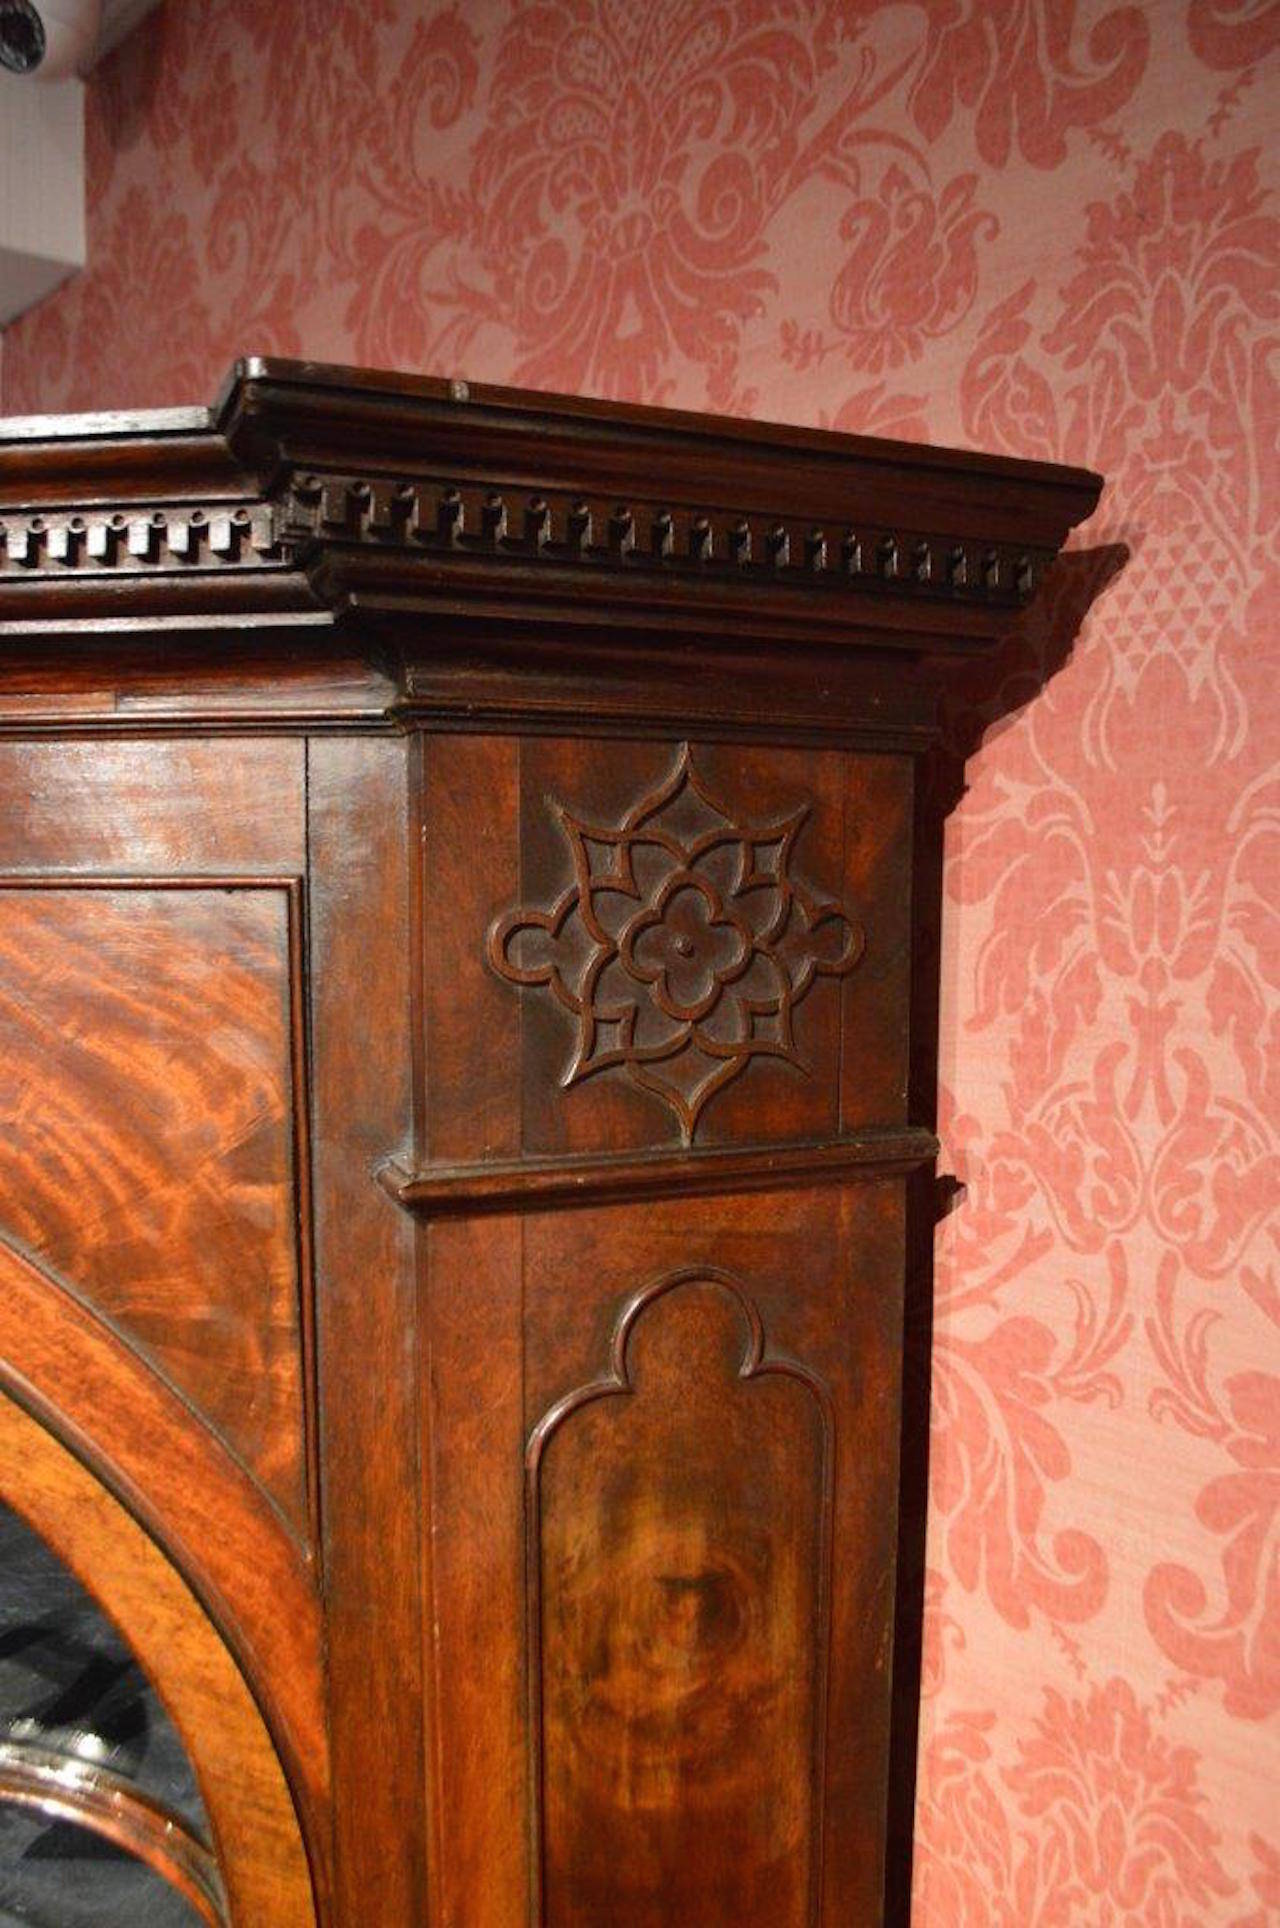 Late 18th Century Mahogany George III Period Chippendale Inspired, Double-Corner Cabinet